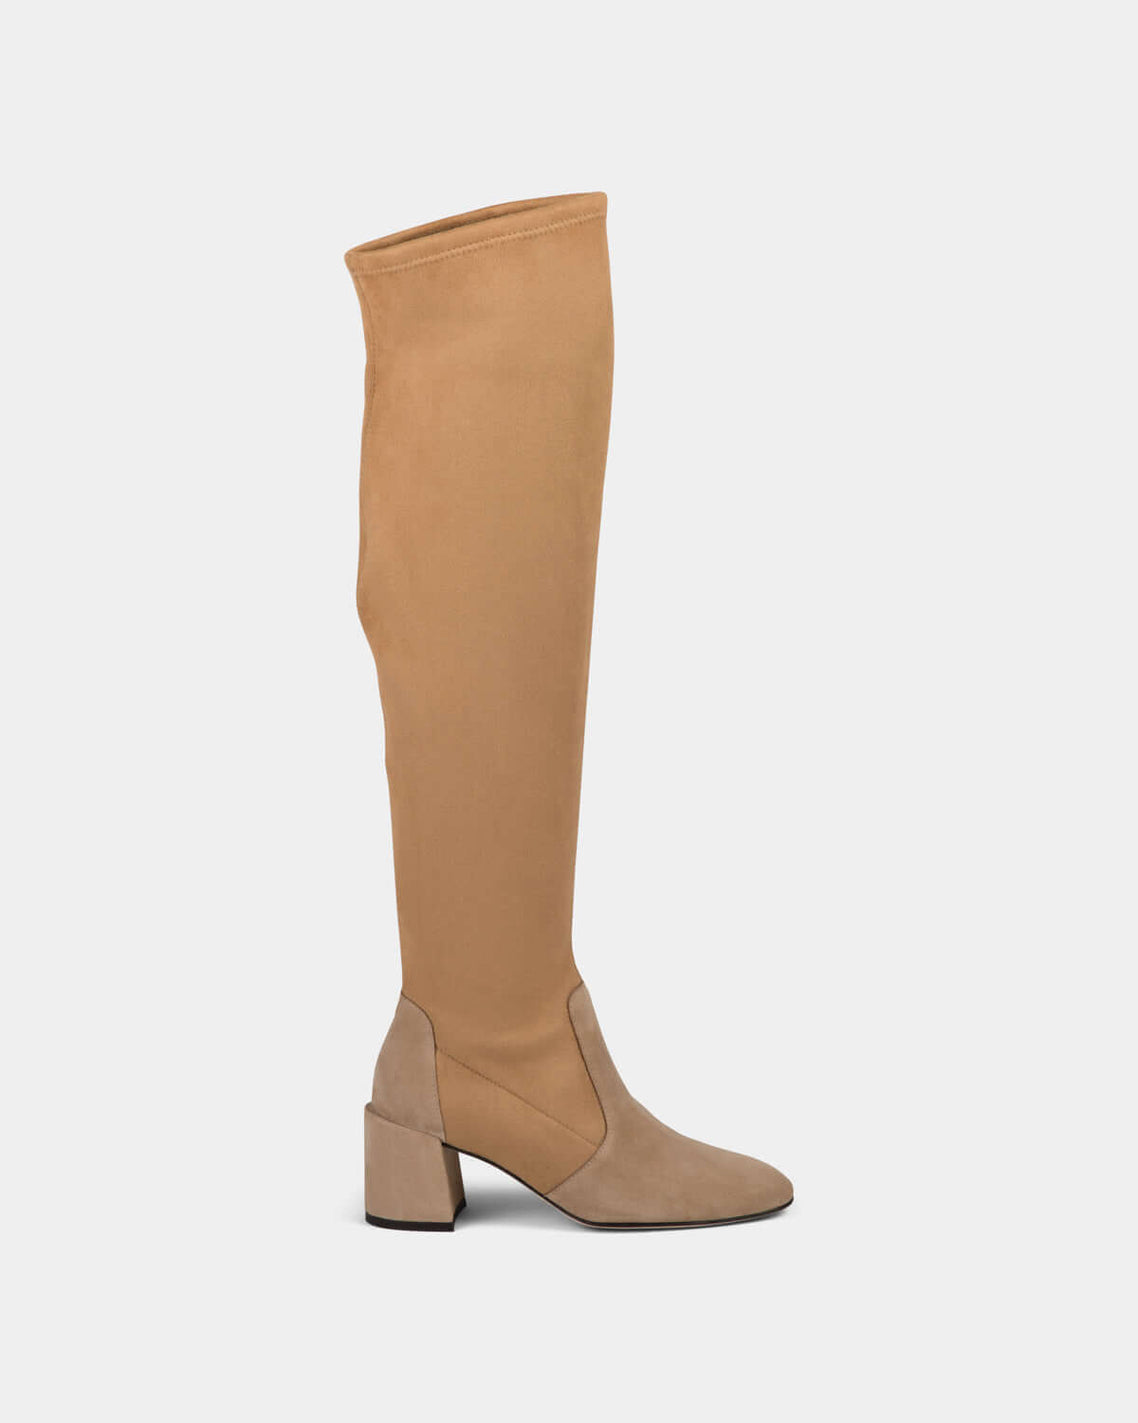 kallu-kallú-beige-leather-shoes-for-women-made-in-spain-boots-long-boots